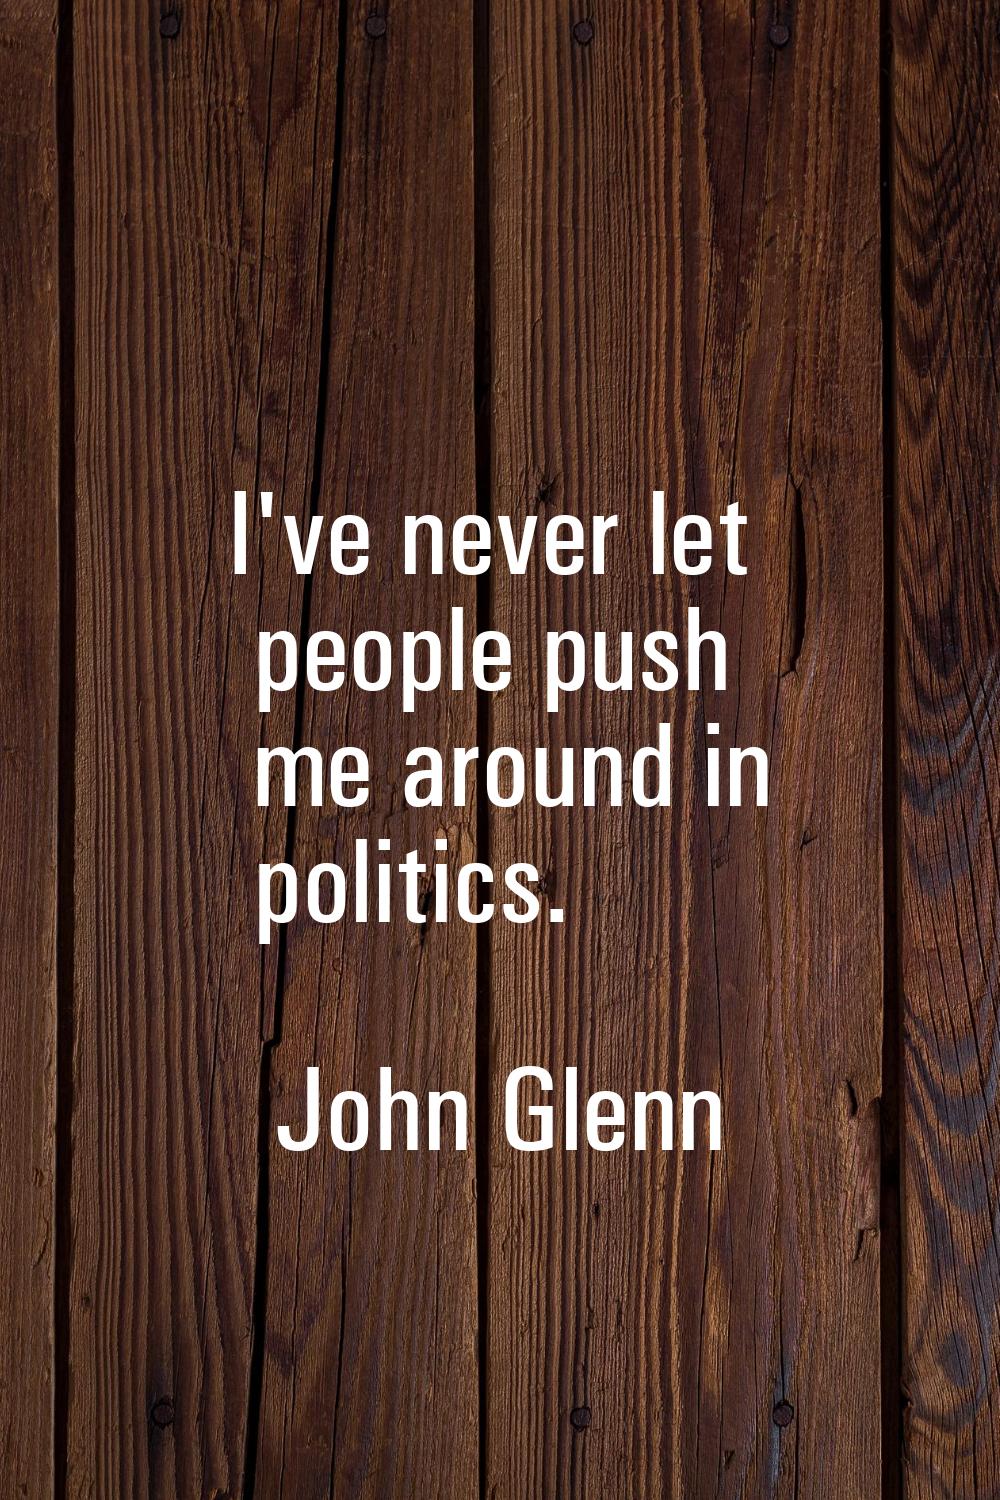 I've never let people push me around in politics.